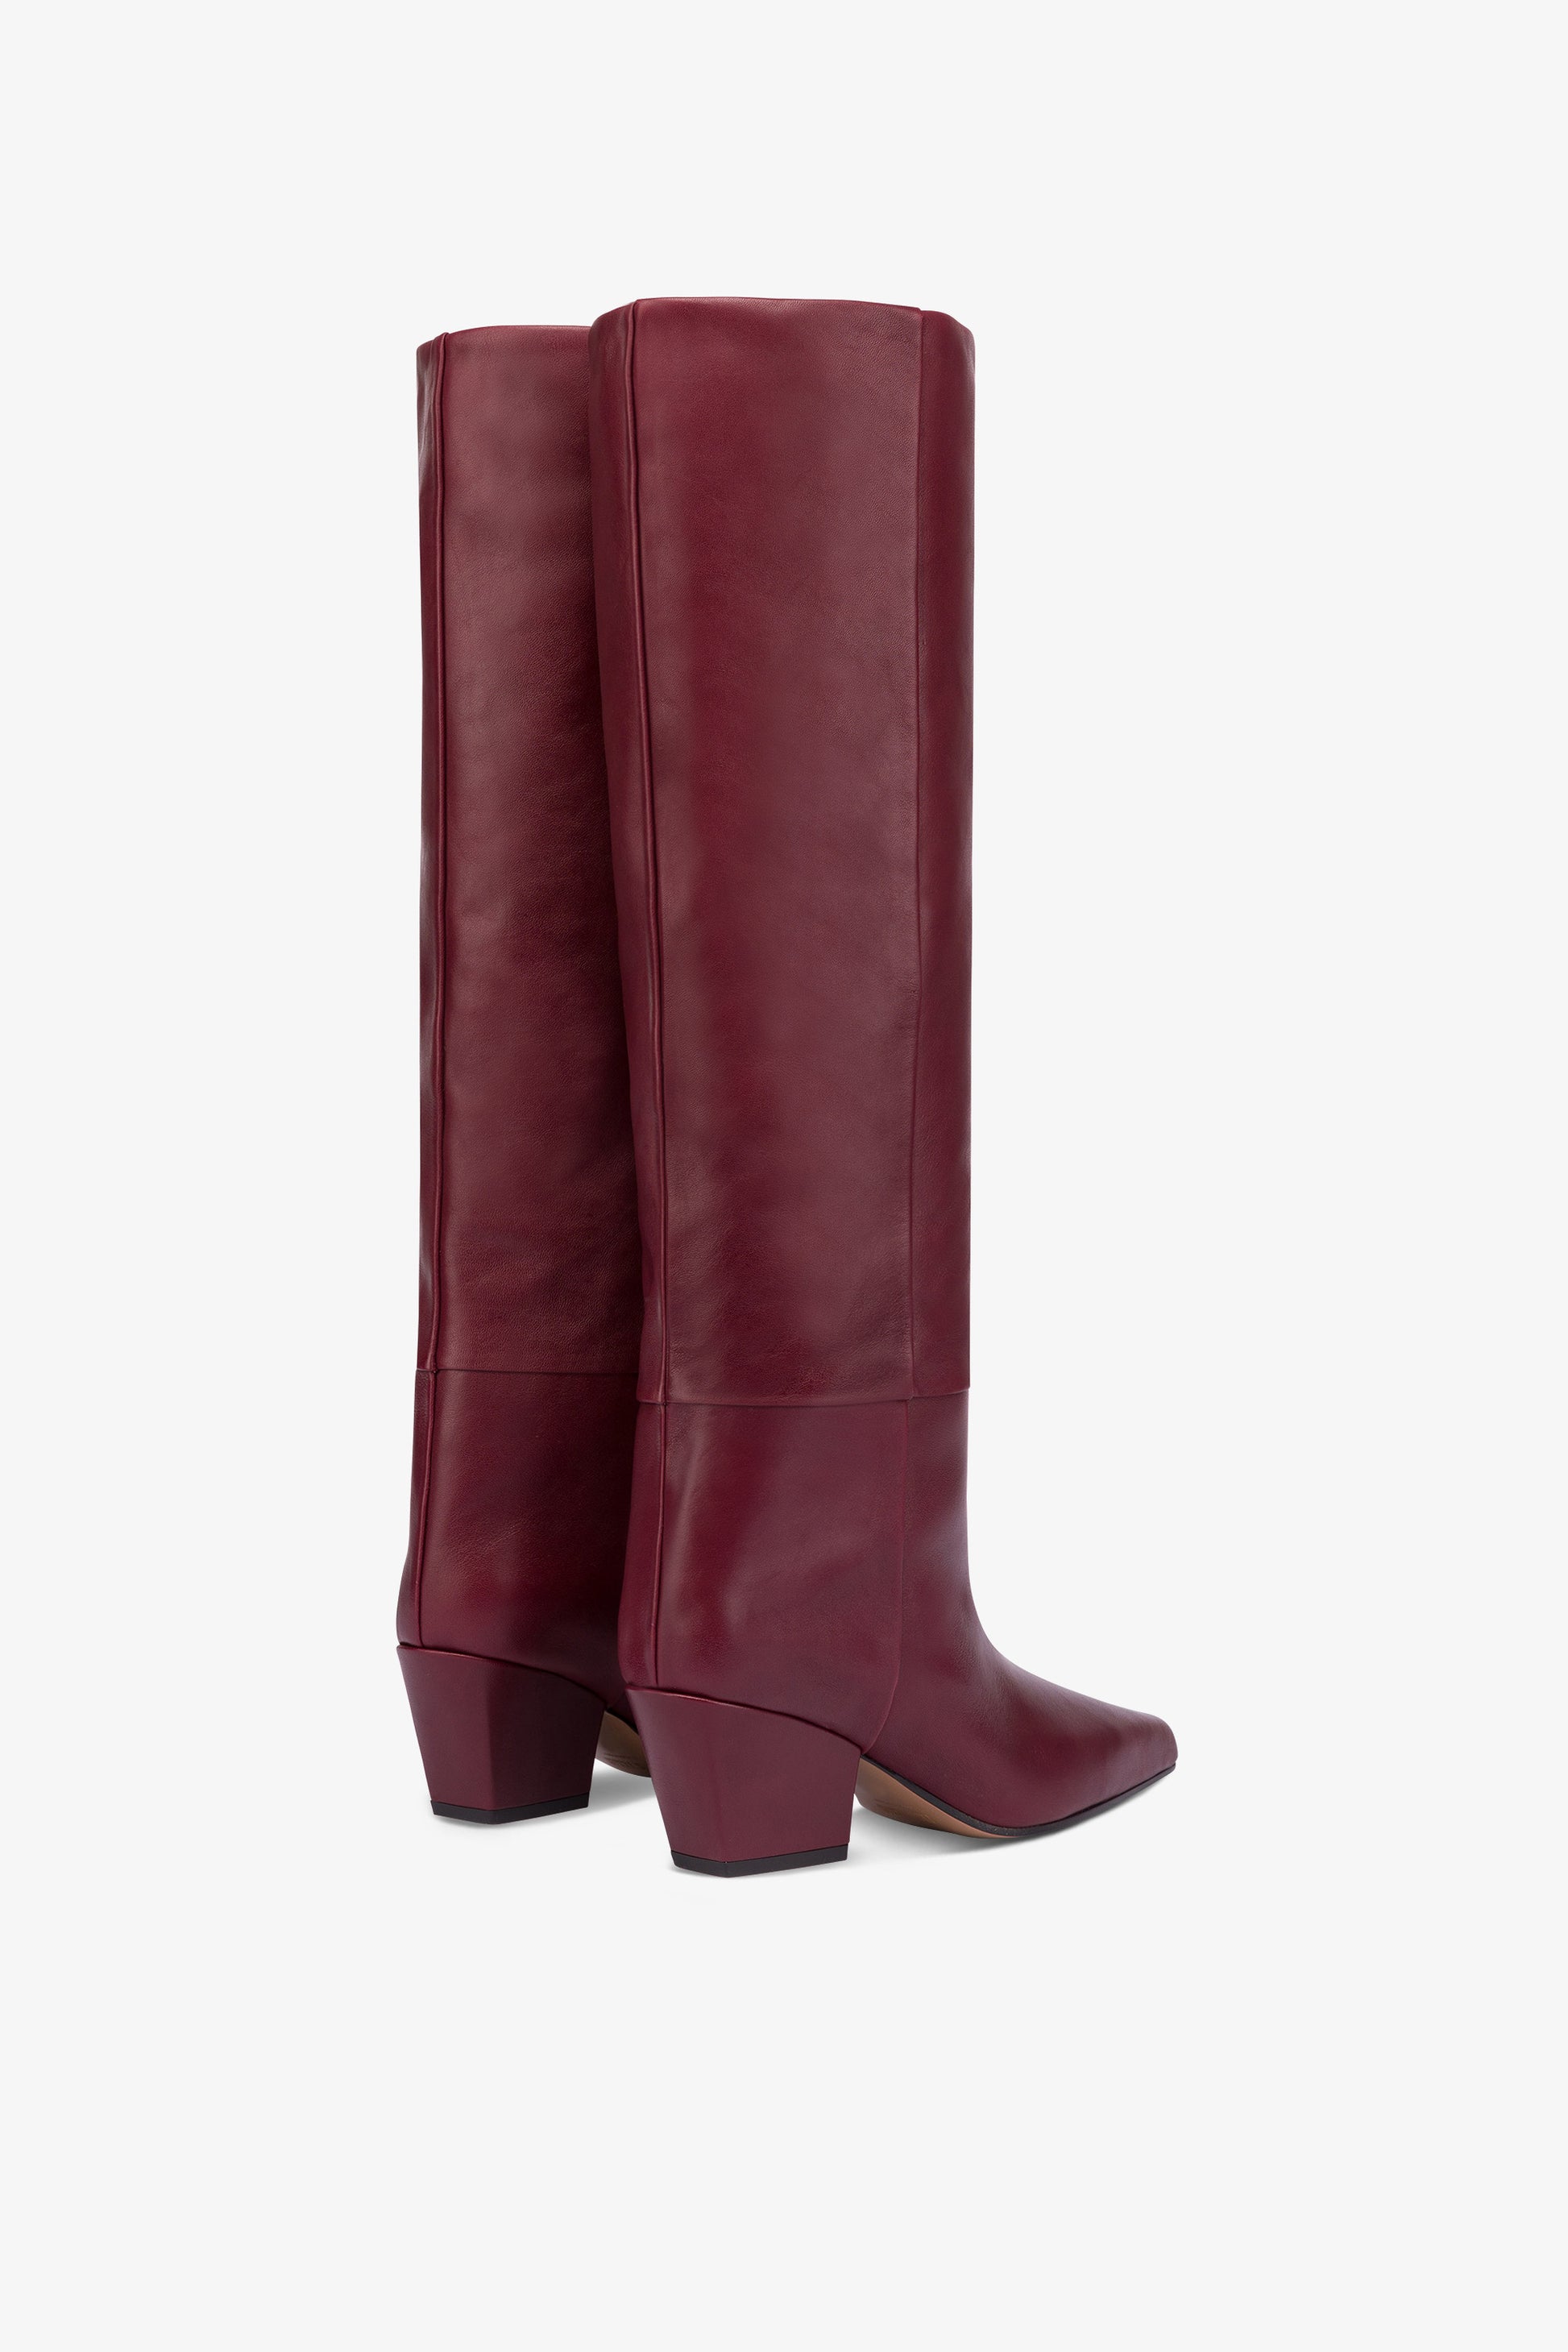 Knee-high, long pointed boot in supple rouge noir leather